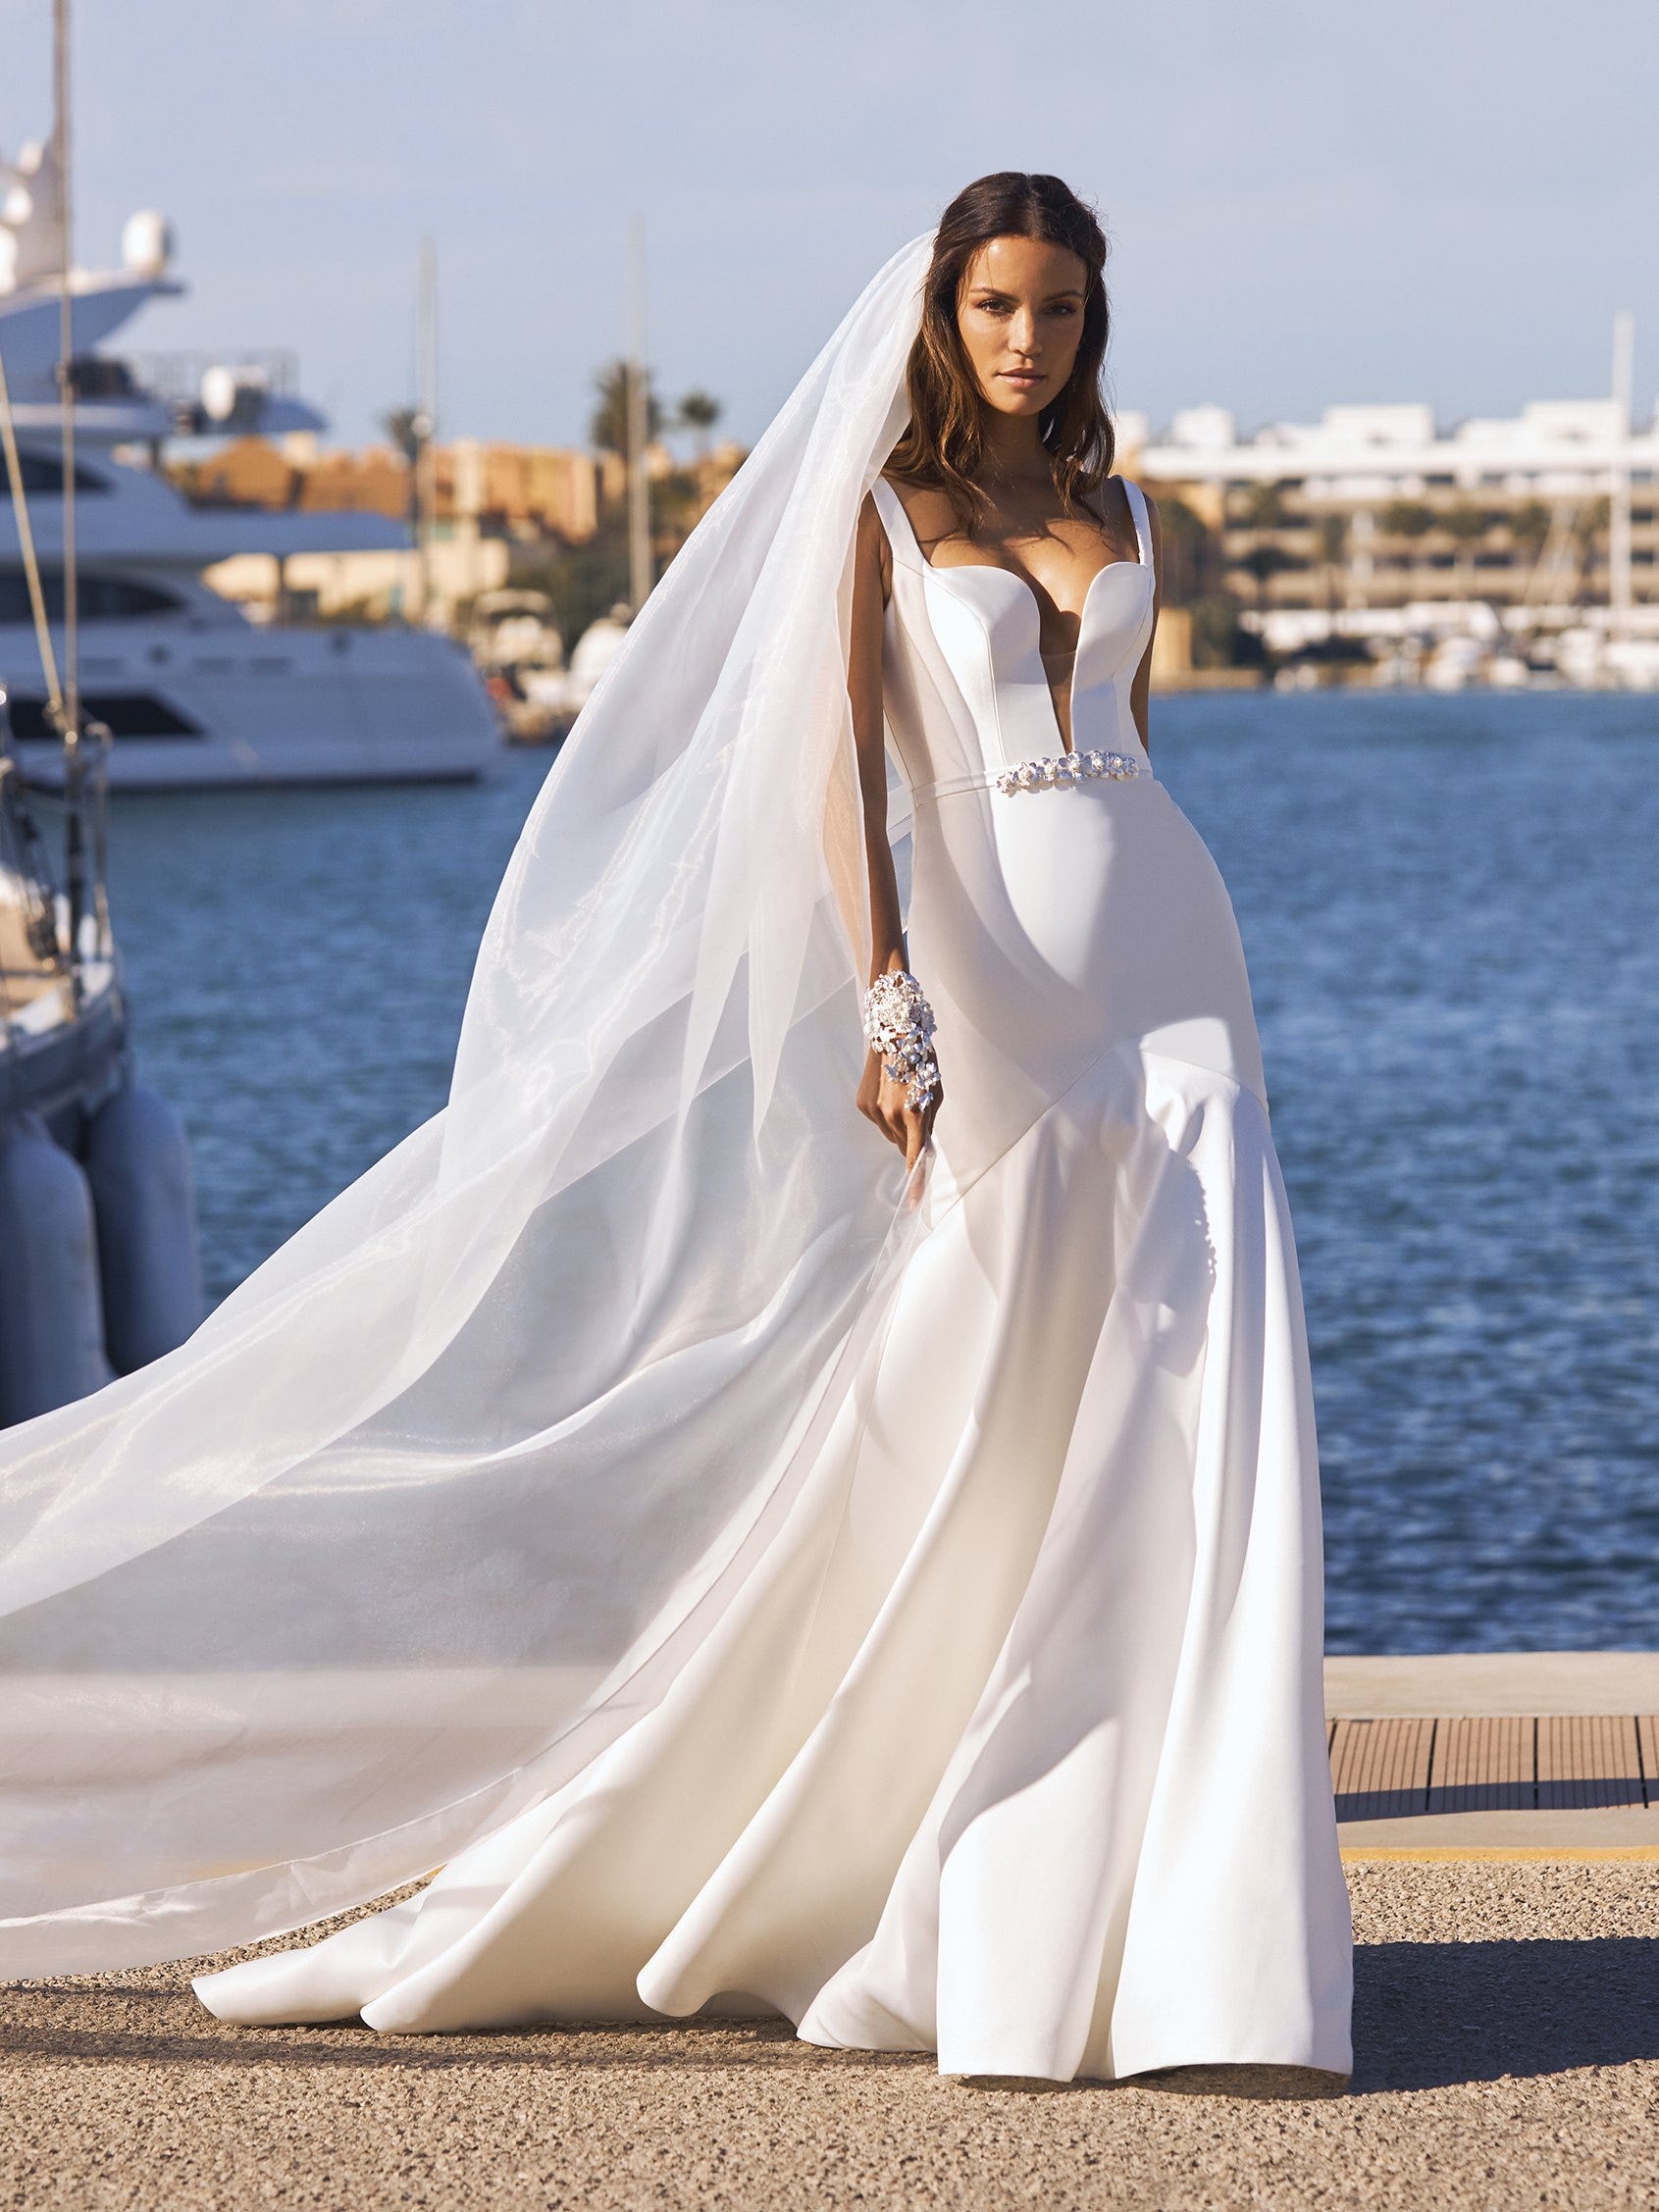 20 of Our Favorite Modest Wedding Dresses | Maggie Sottero